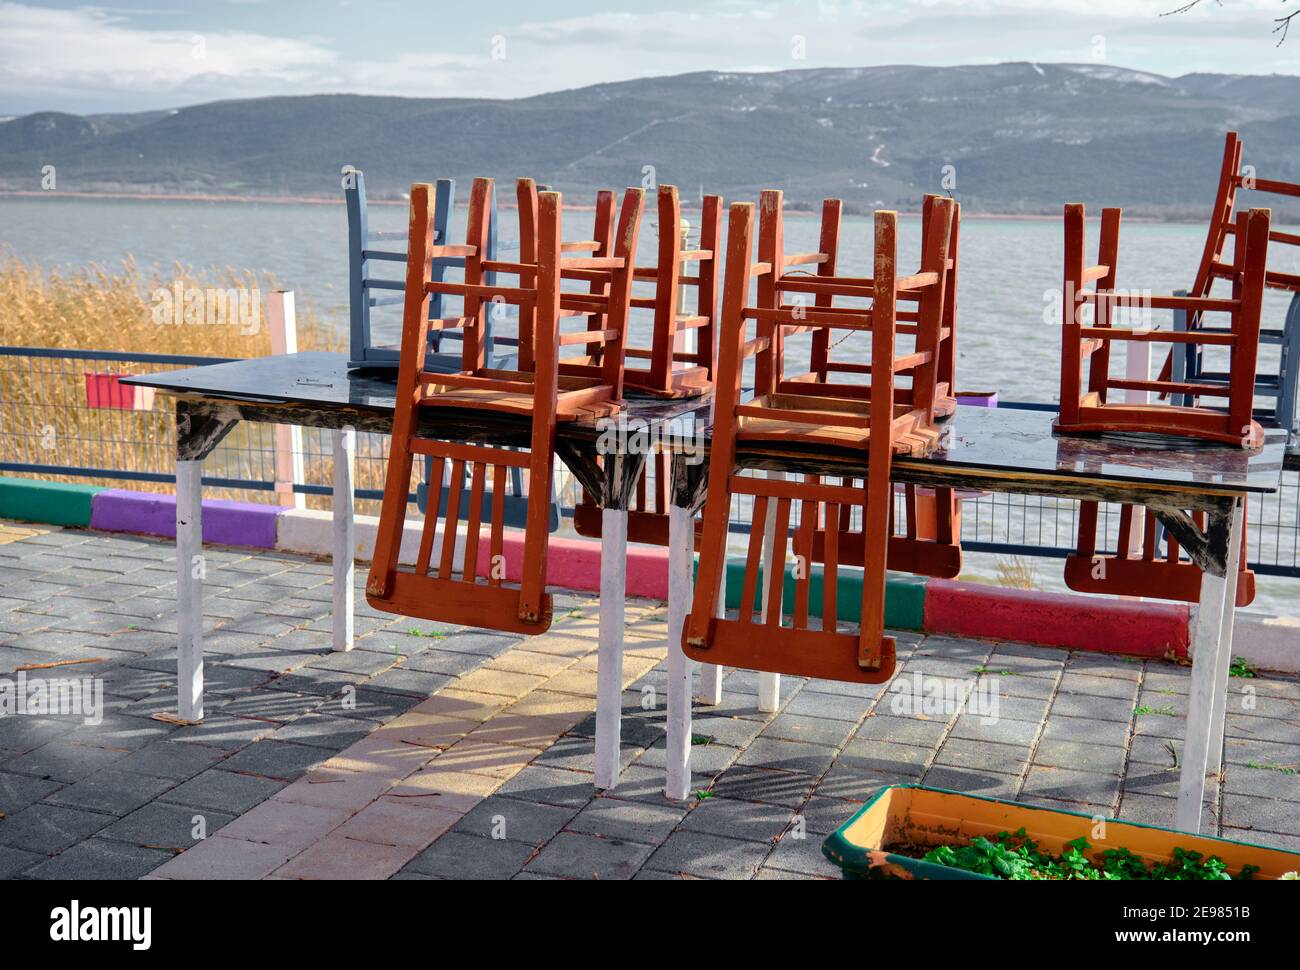 Cute cafe near the lake and sea is closed due to the pandemic with lake and mountain background. Old and wooden chairs staying on table.Colorful photo Stock Photo